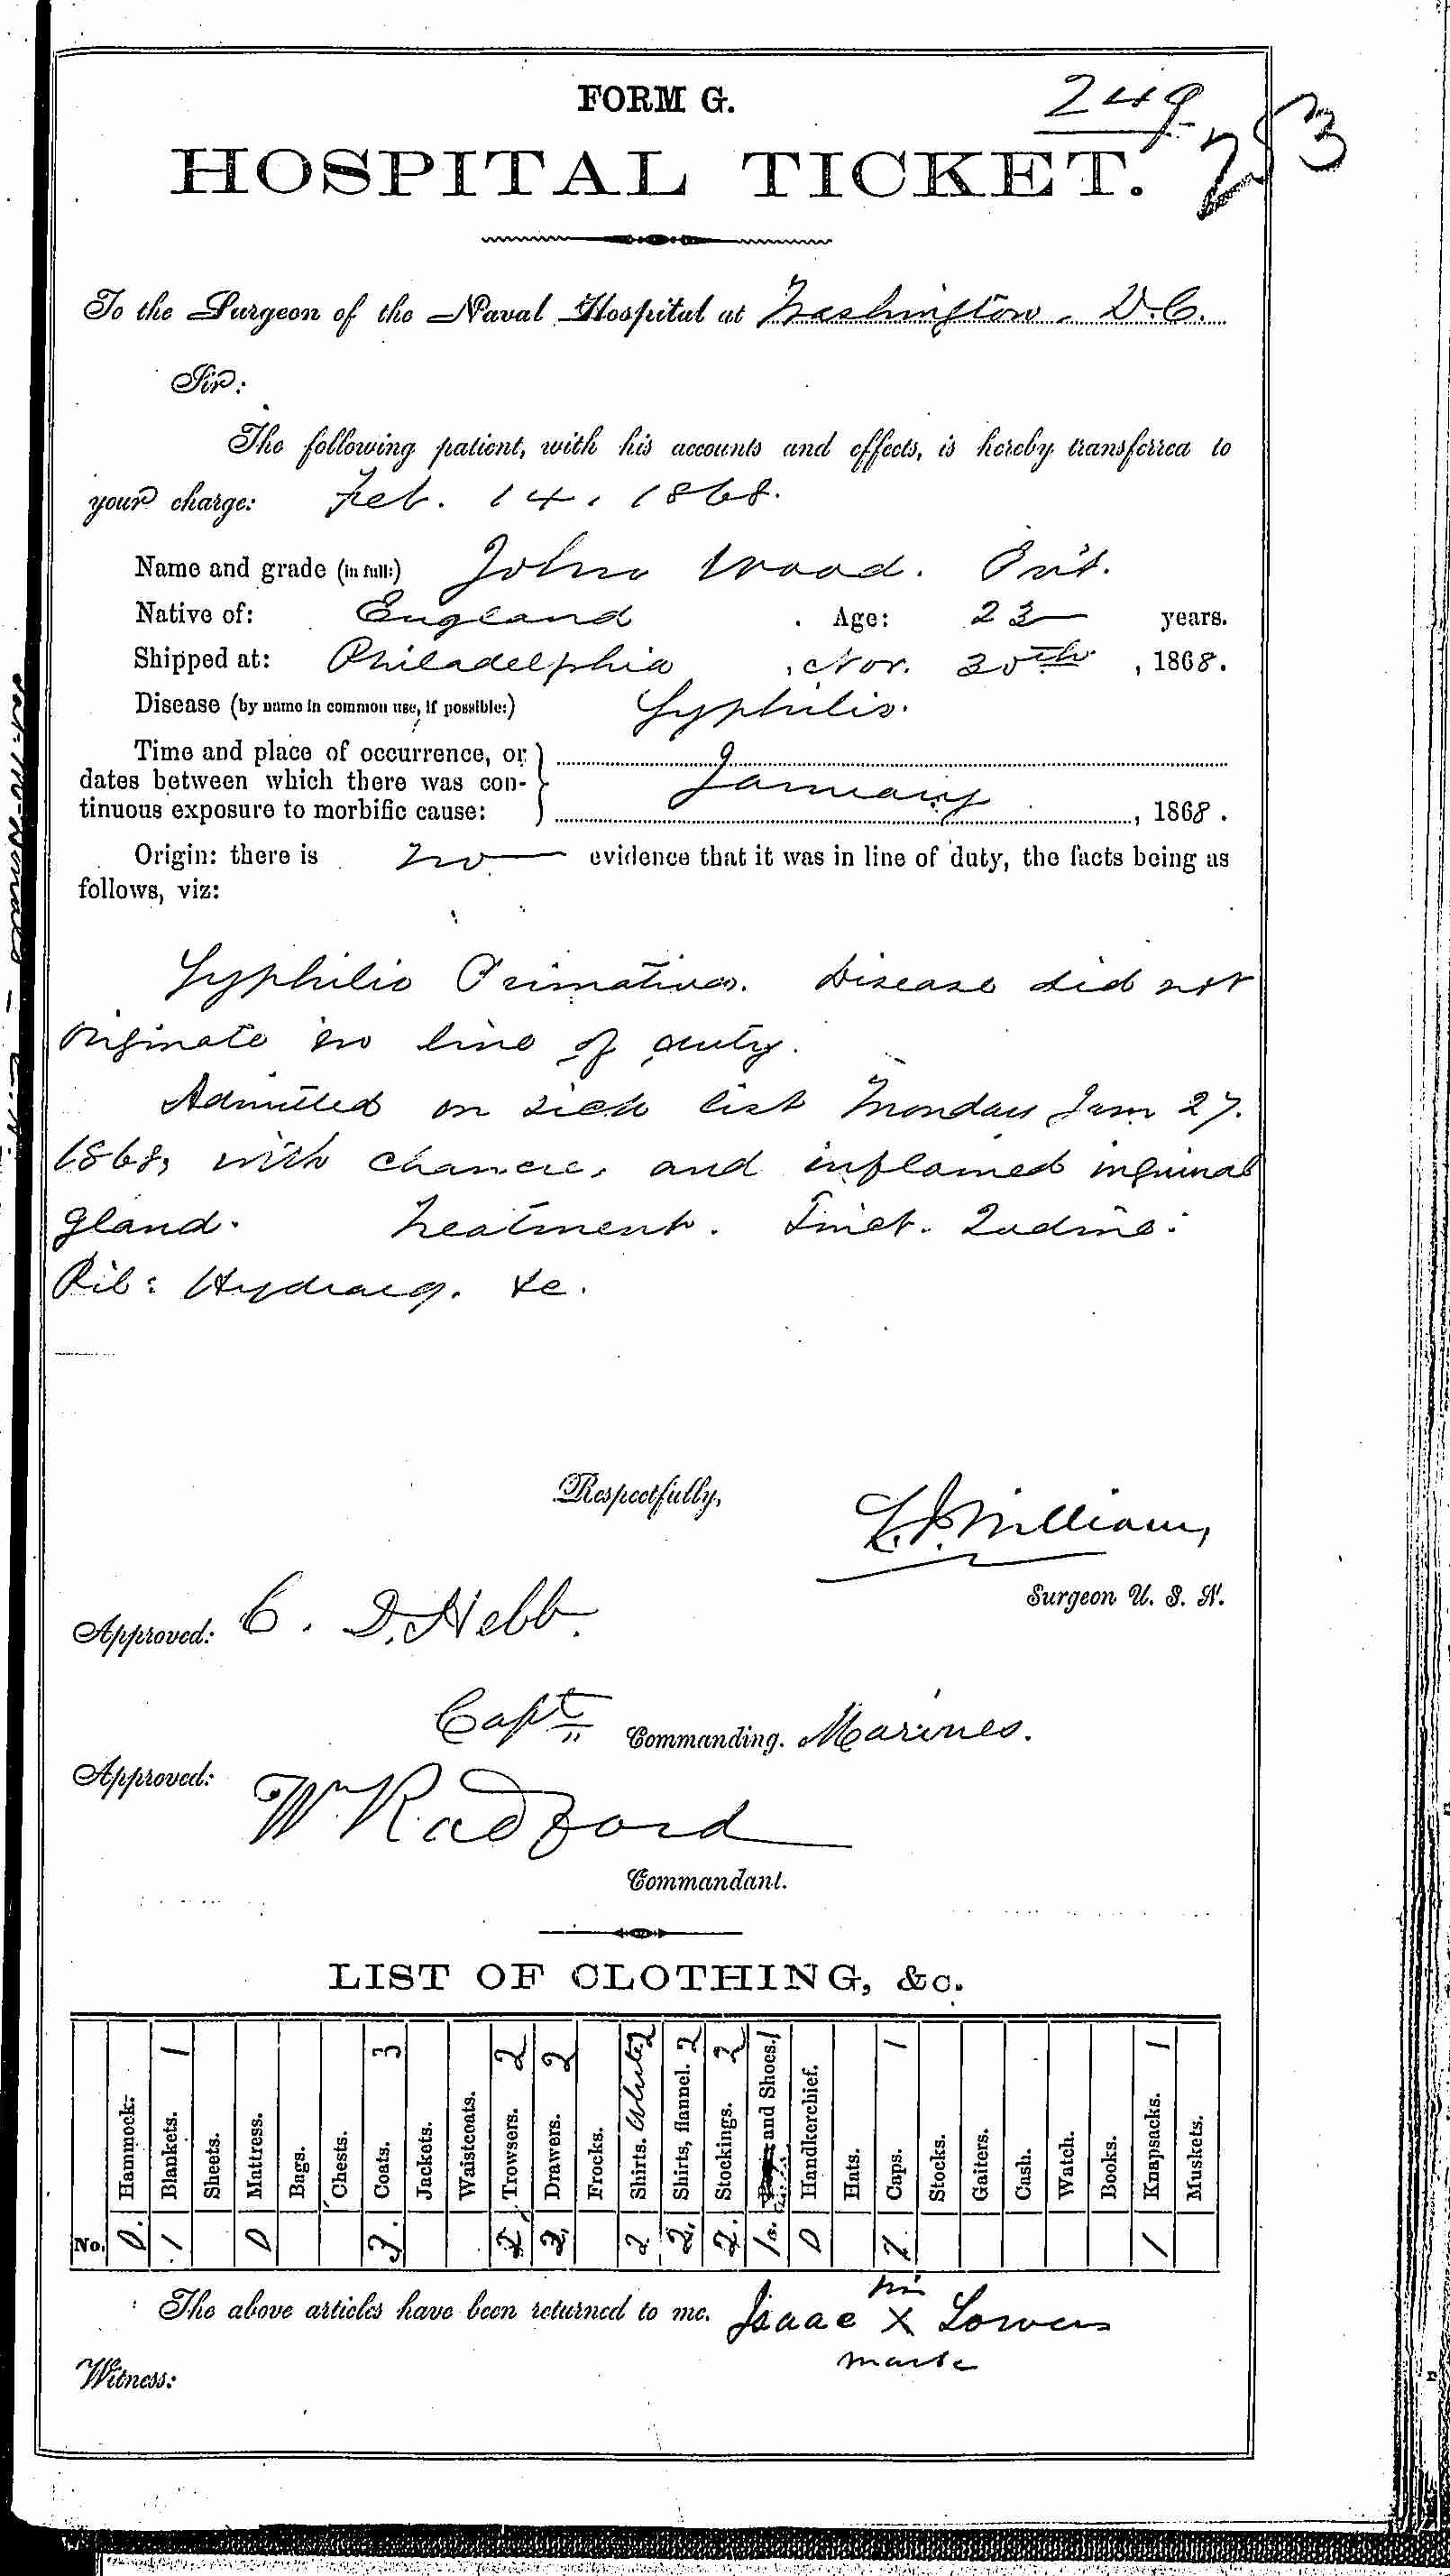 Entry for John Wood (page 1 of 2) in the log Hospital Tickets and Case Papers - Naval Hospital - Washington, D.C. - 1866-68